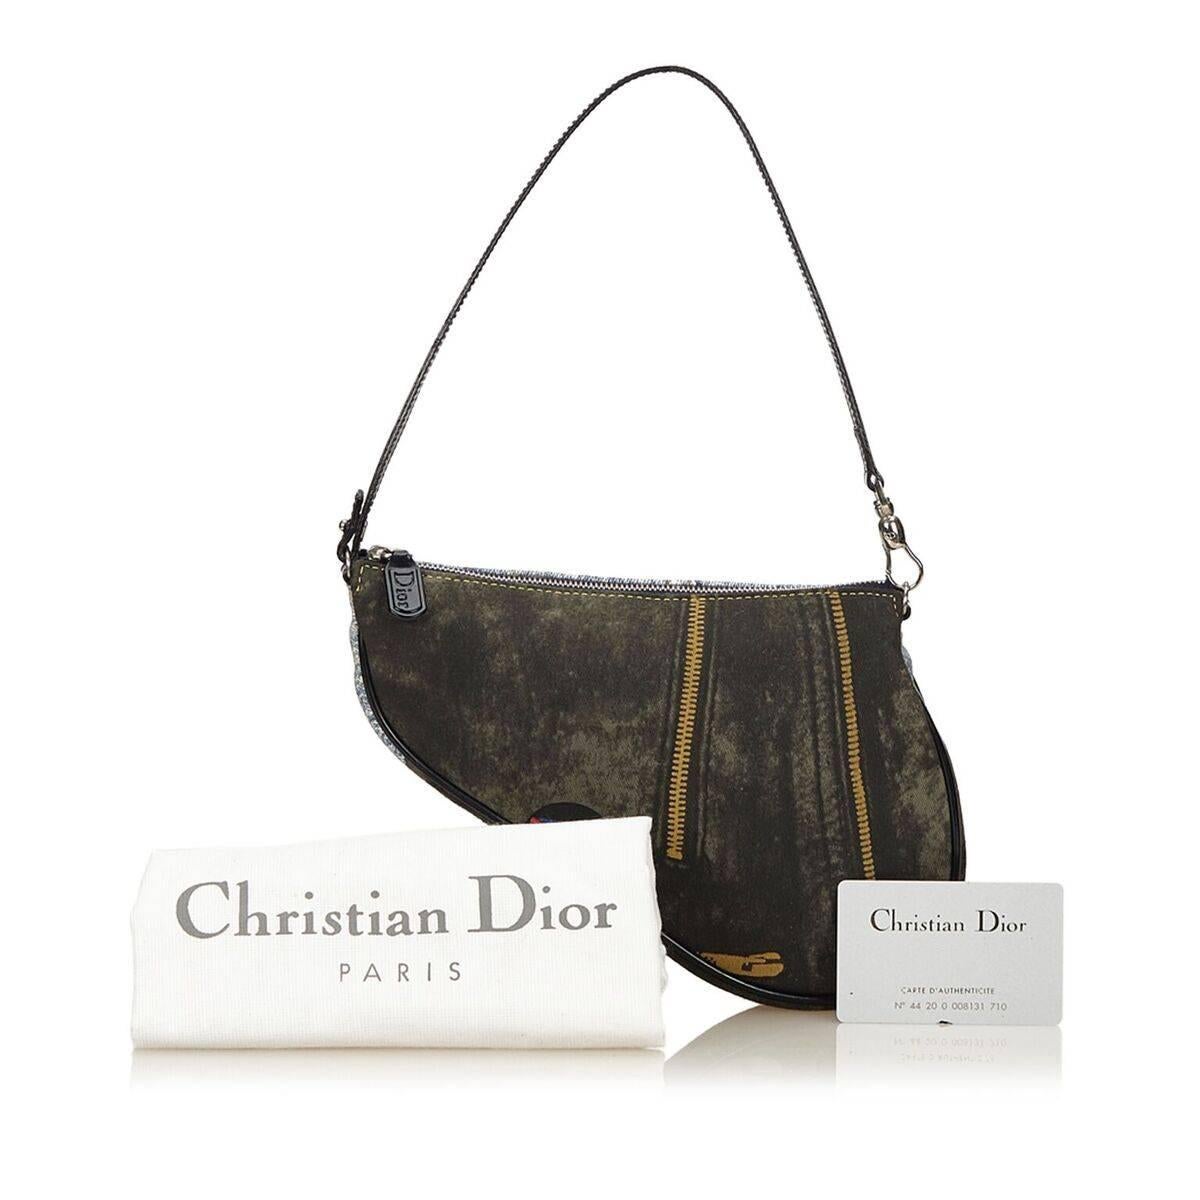 Product details:  Multicolor denim mini saddle bag by Christian Dior.  Trimmed with leather.  Printed and patch design.  Single shoulder strap.  Top zip closure.  Lined interior.  Authenticity card and dust bag included.  Silvertone hardware.  9